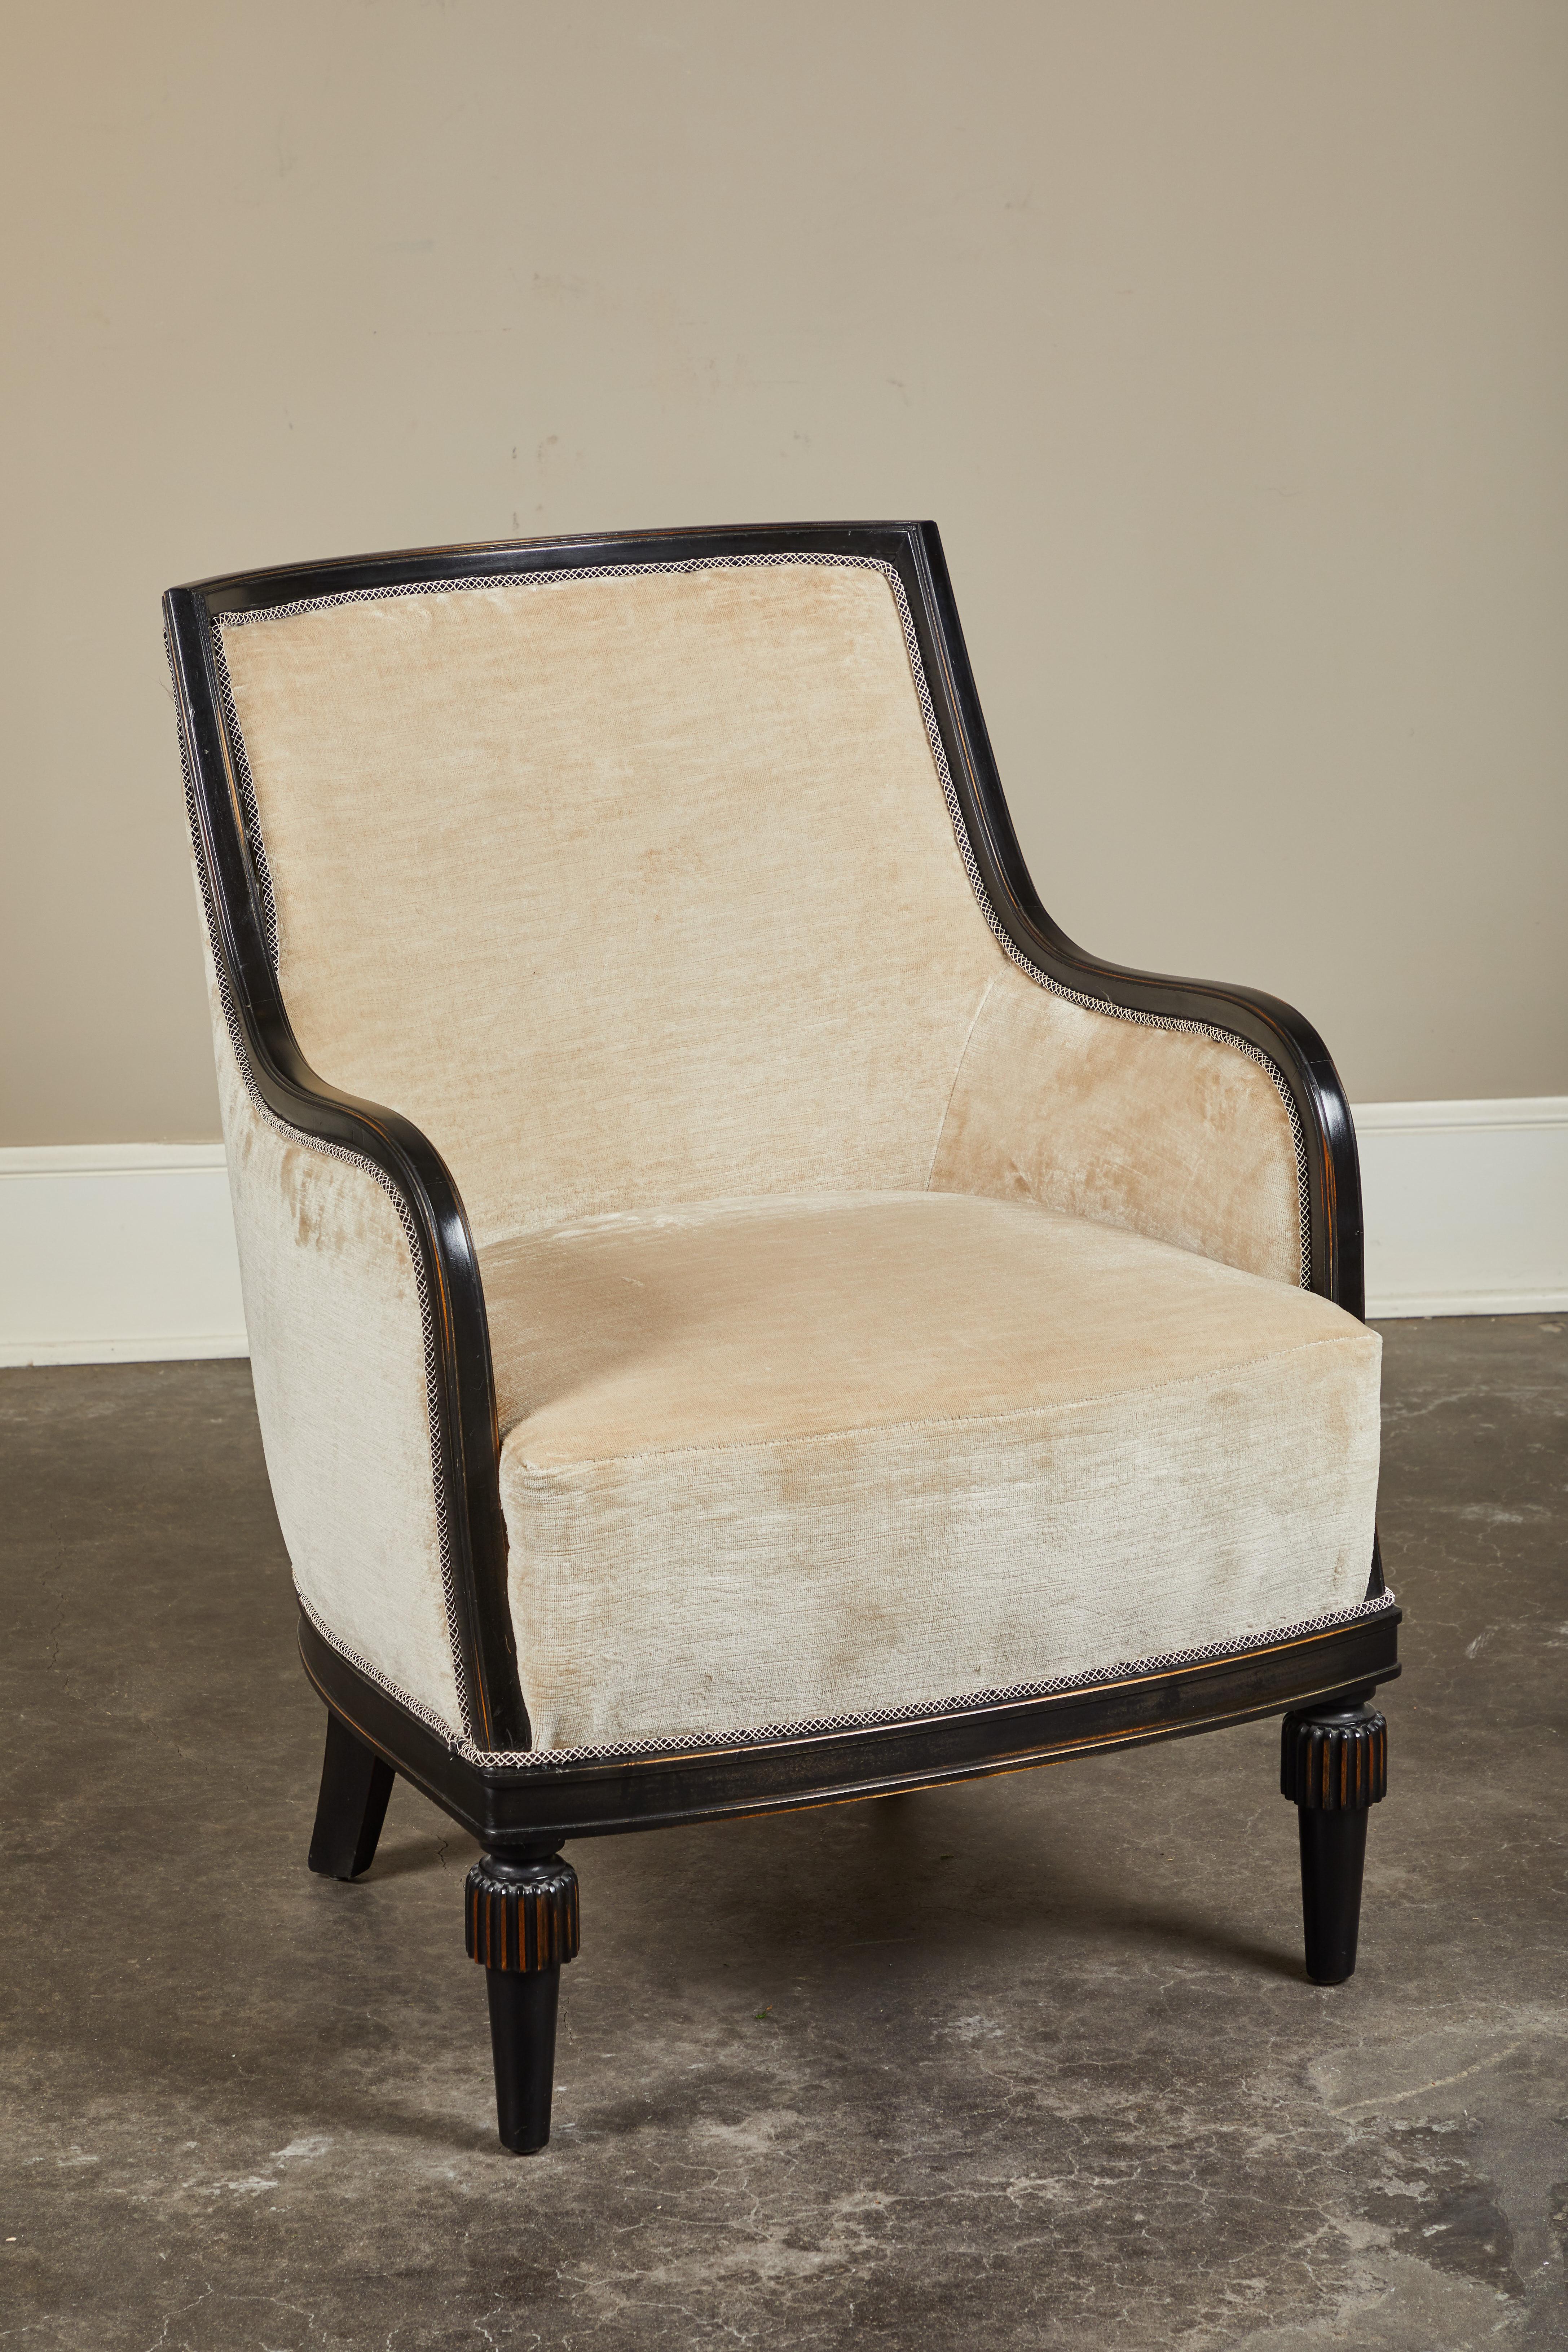 British Colonial Victoria Chair with Tassel Foot, Susanne Hollis Collection For Sale